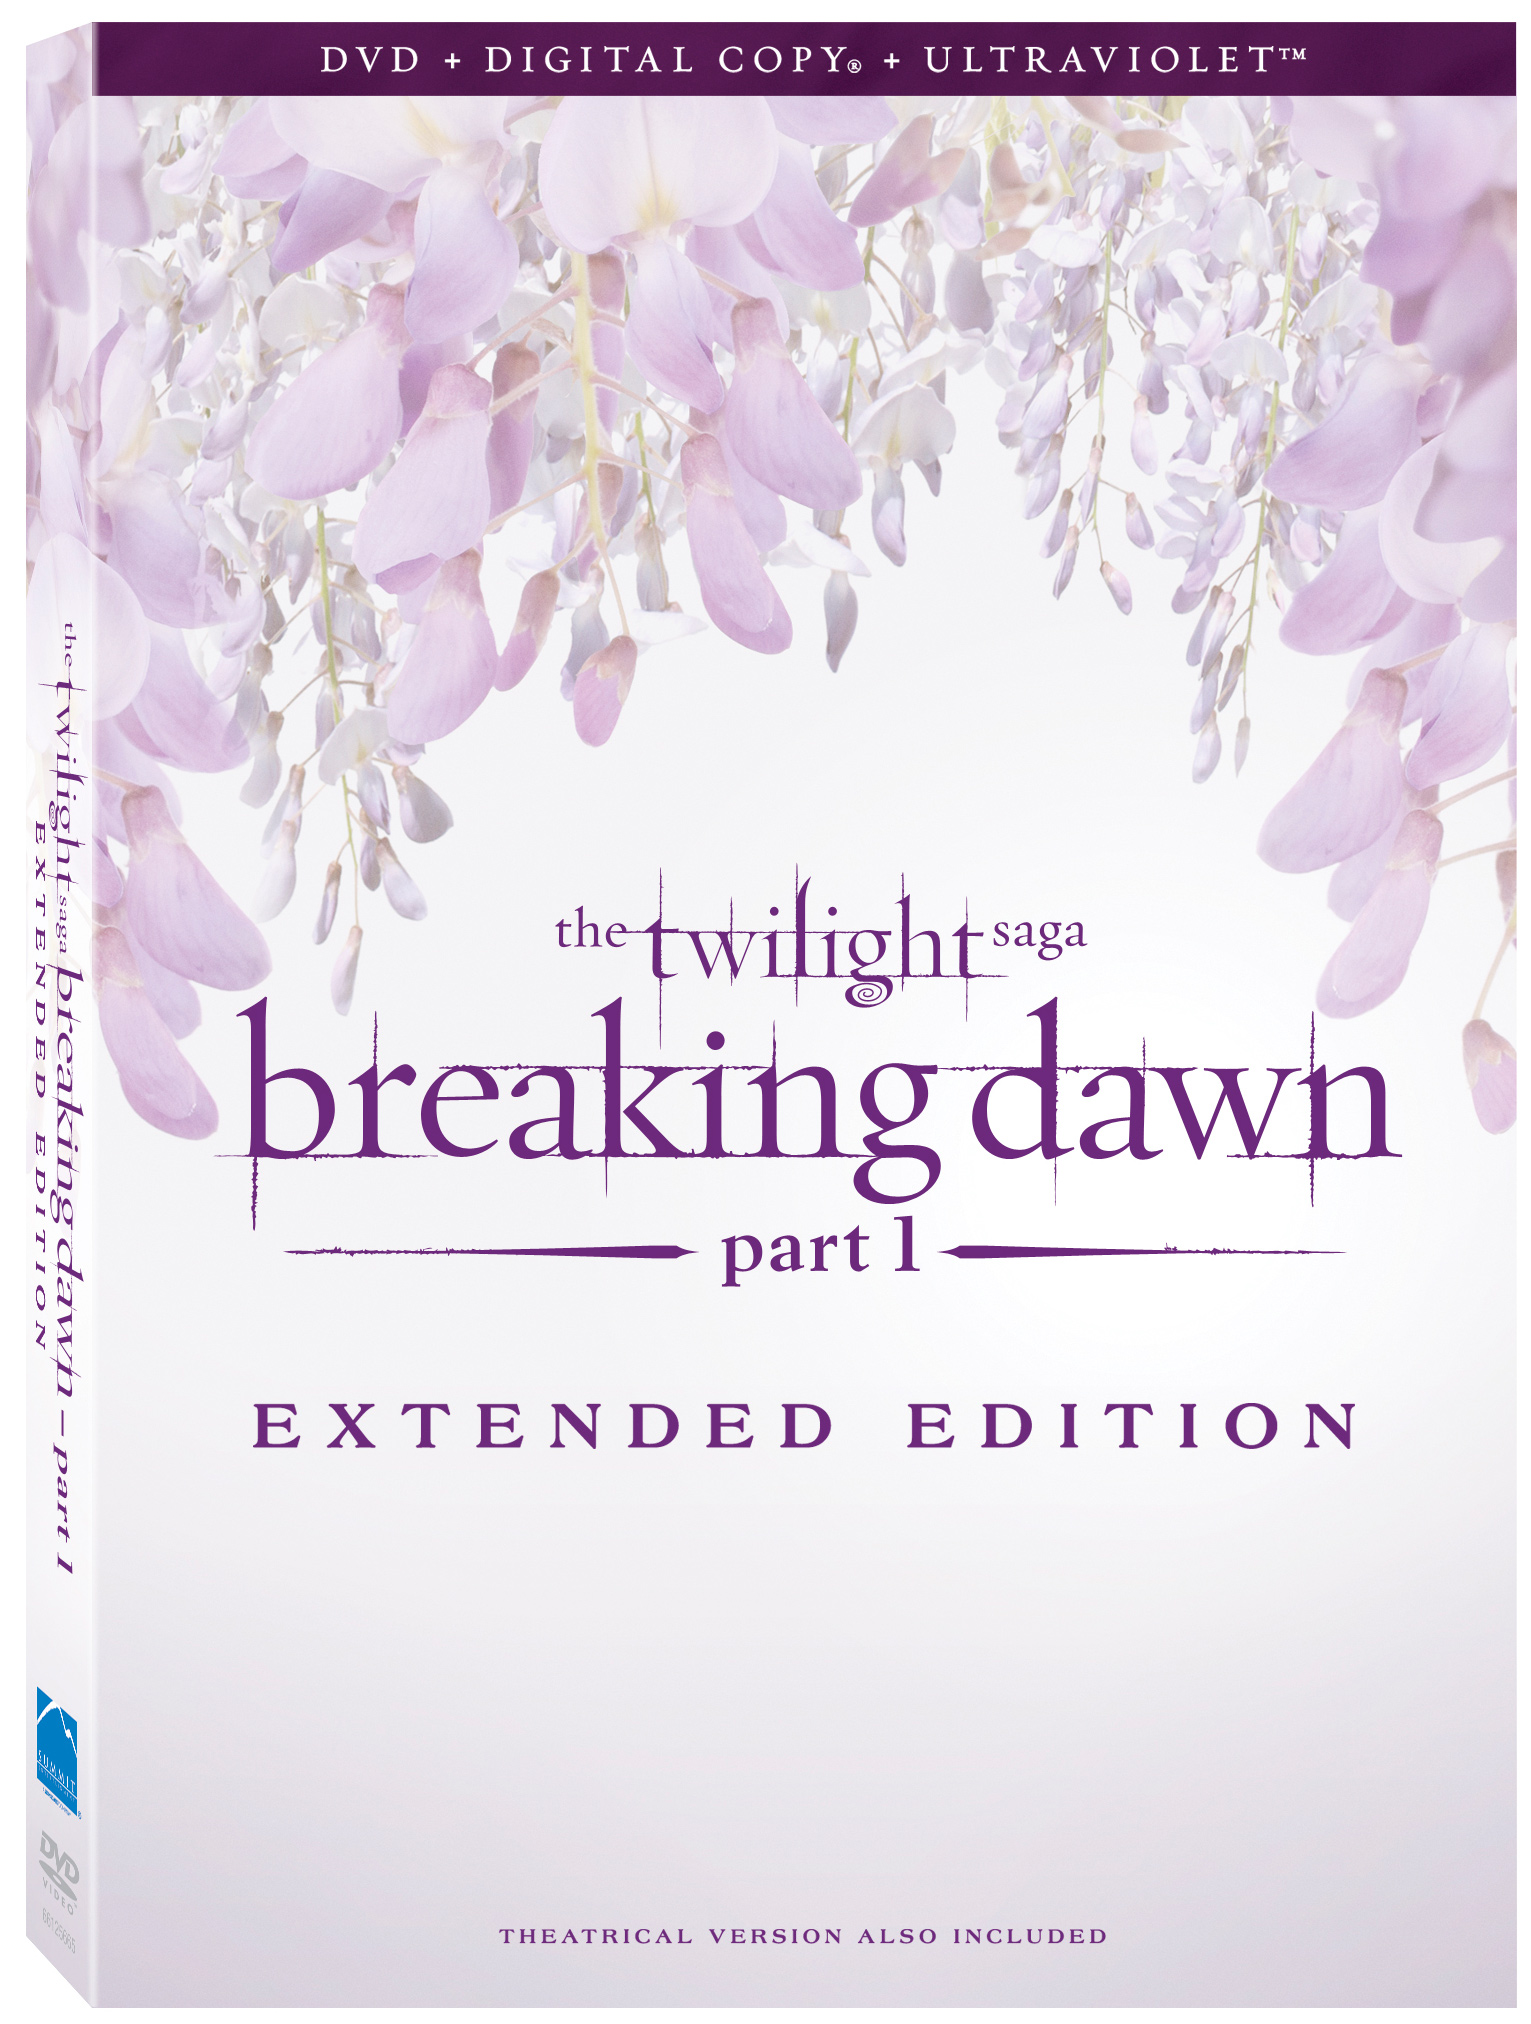 the twilight saga breaking dawn part 1 extended edition